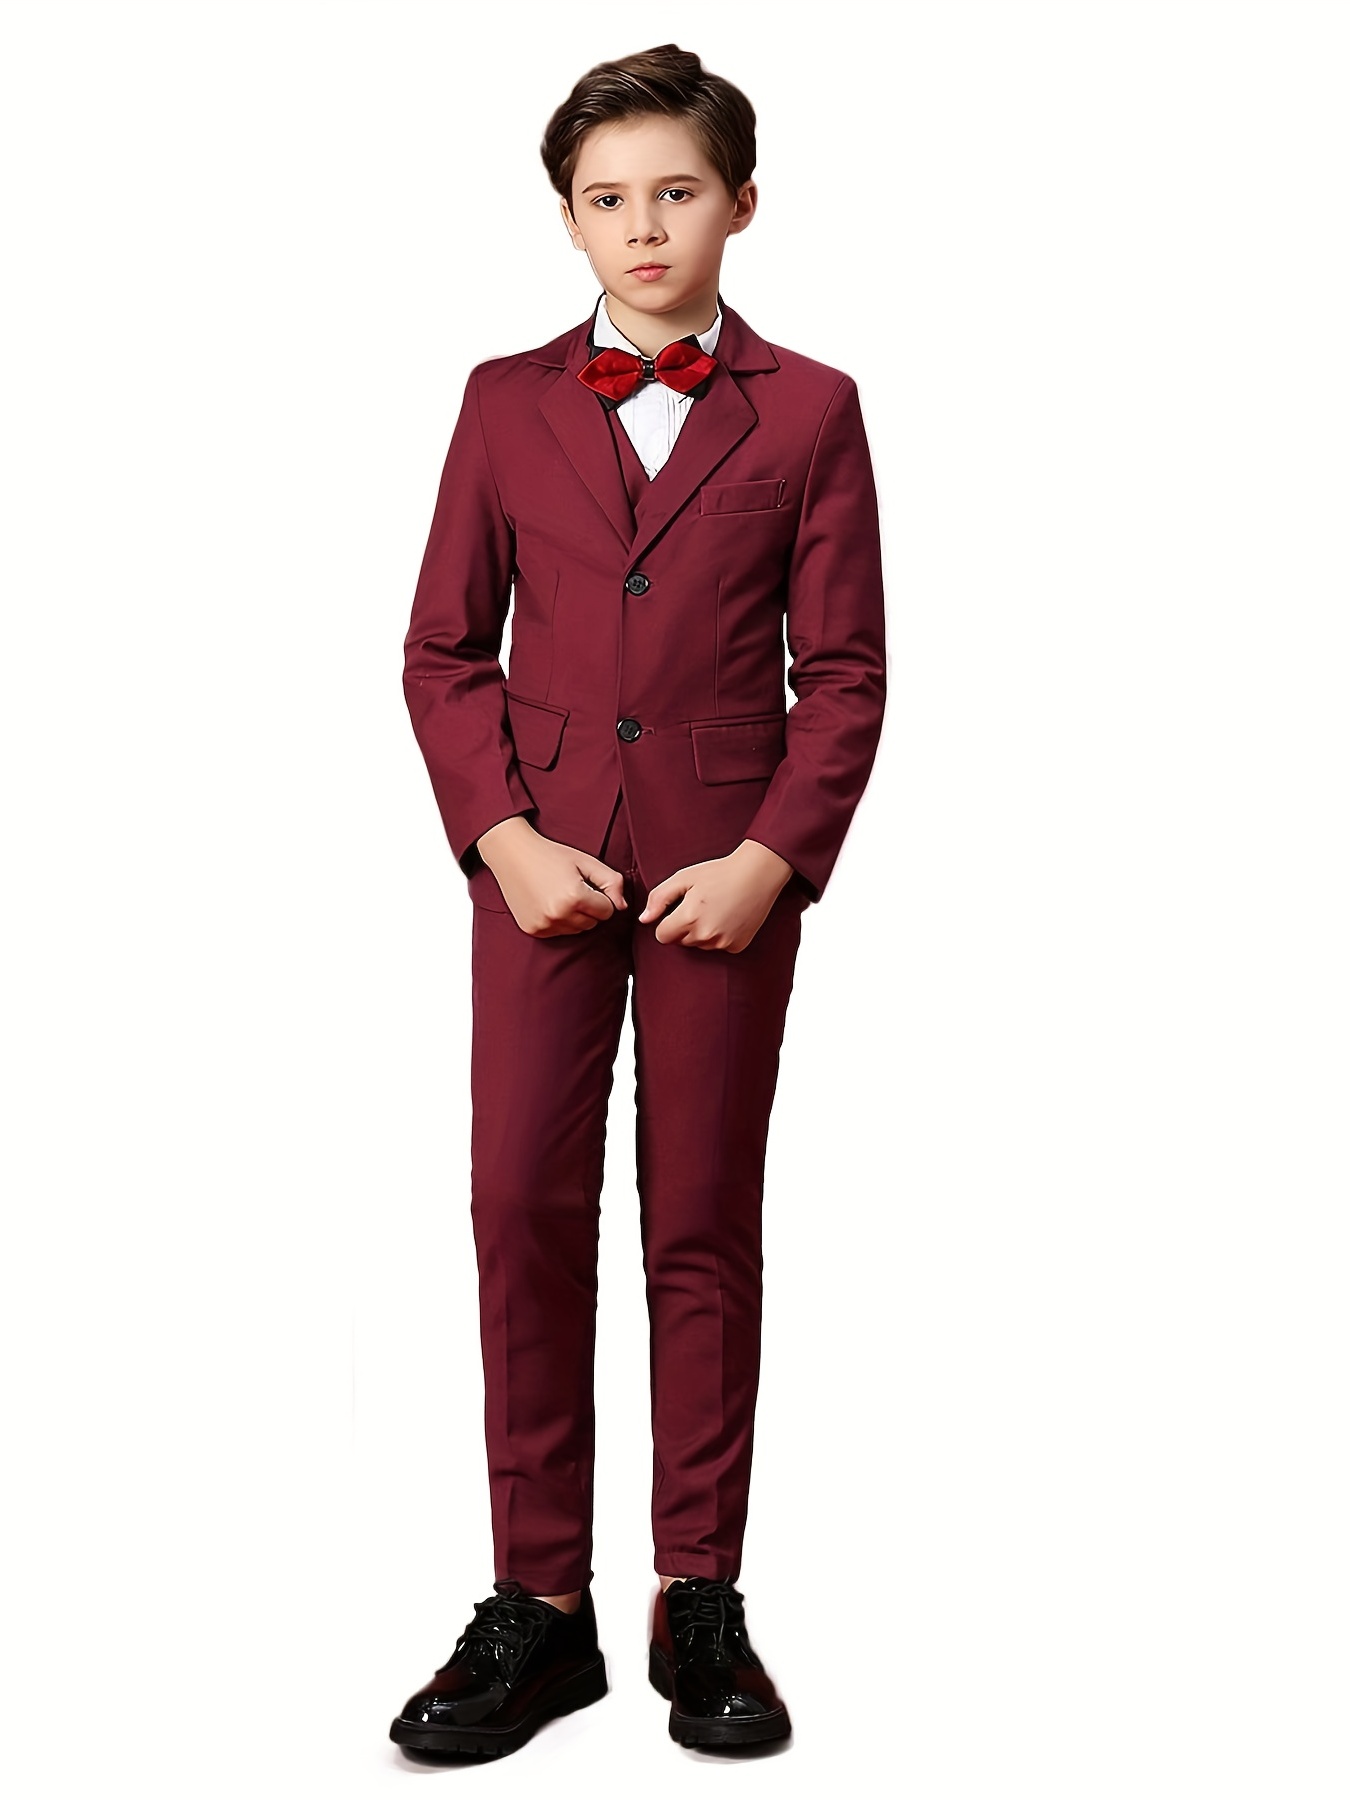 Teenager Boys Preppy Style Clothing Set Coat Pants Blouse+Tie Party Formal  Sets